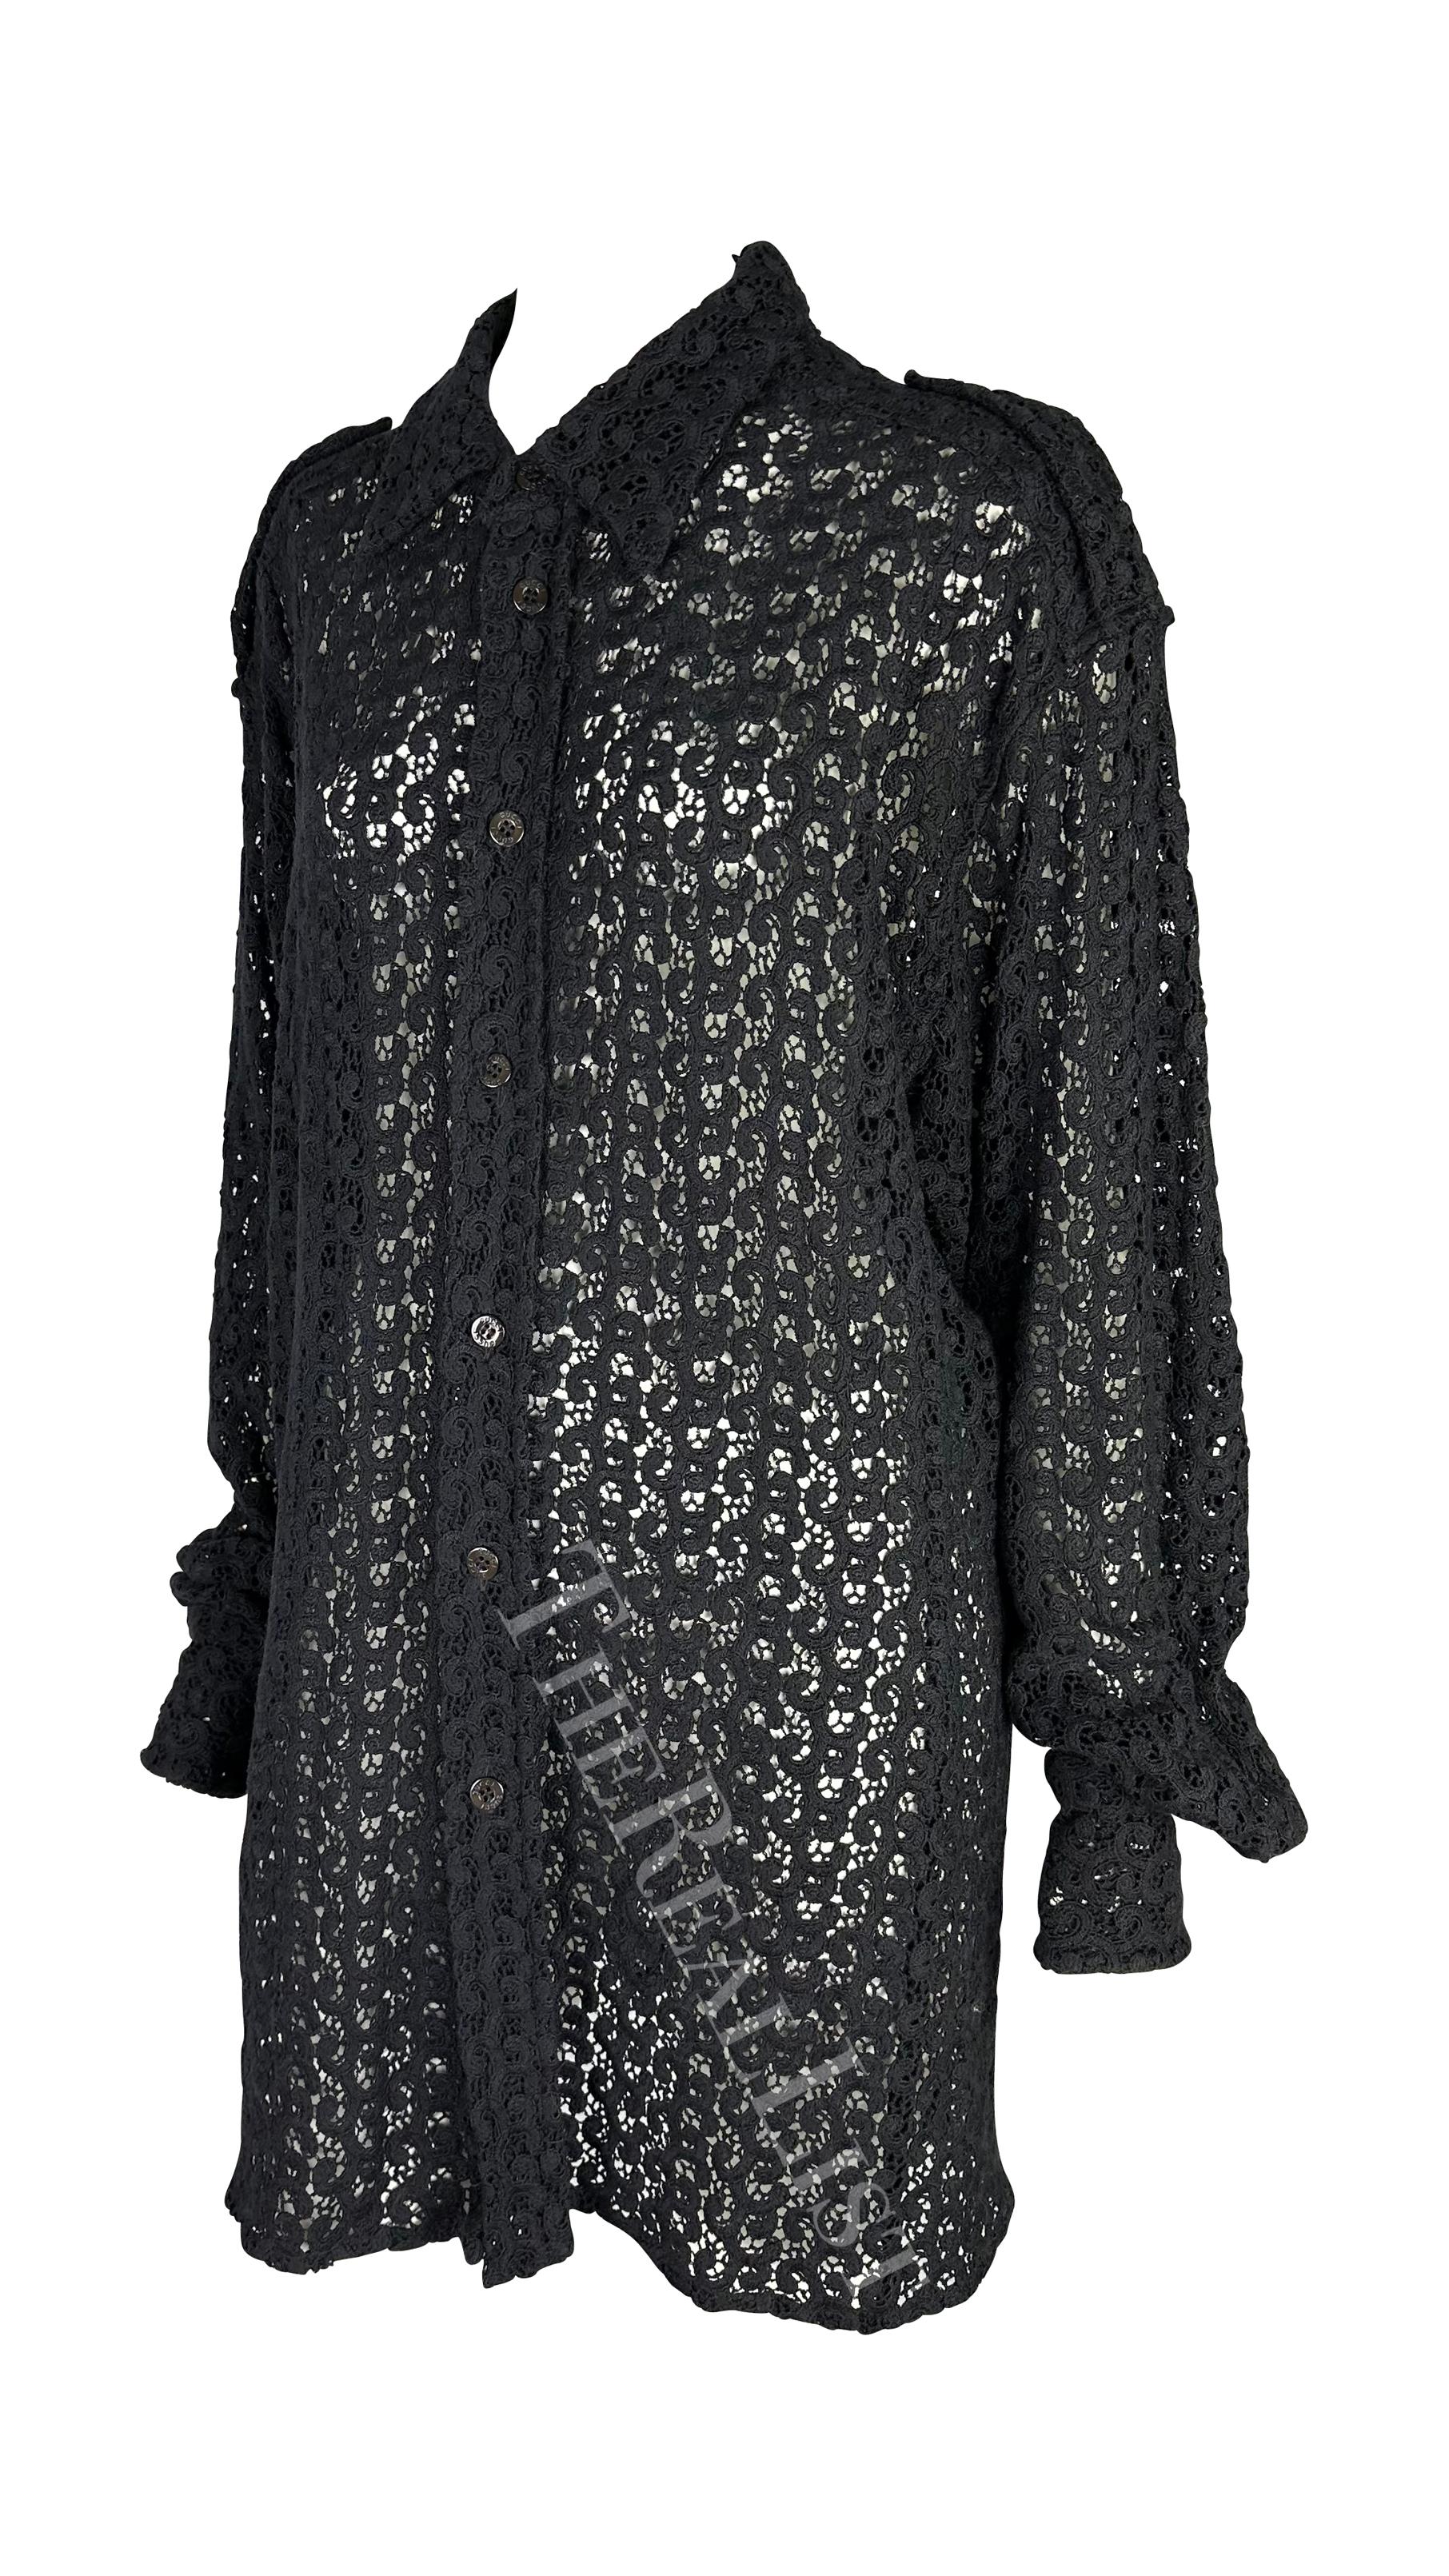 Presenting a fabulous black crochet oversized Gucci shirt, designed by Tom Ford. From the Spring/Summer 1996 collection, this button-down shirt is constructed entirely of an intricate knit pattern and is made complete with epaulets. This unisex top